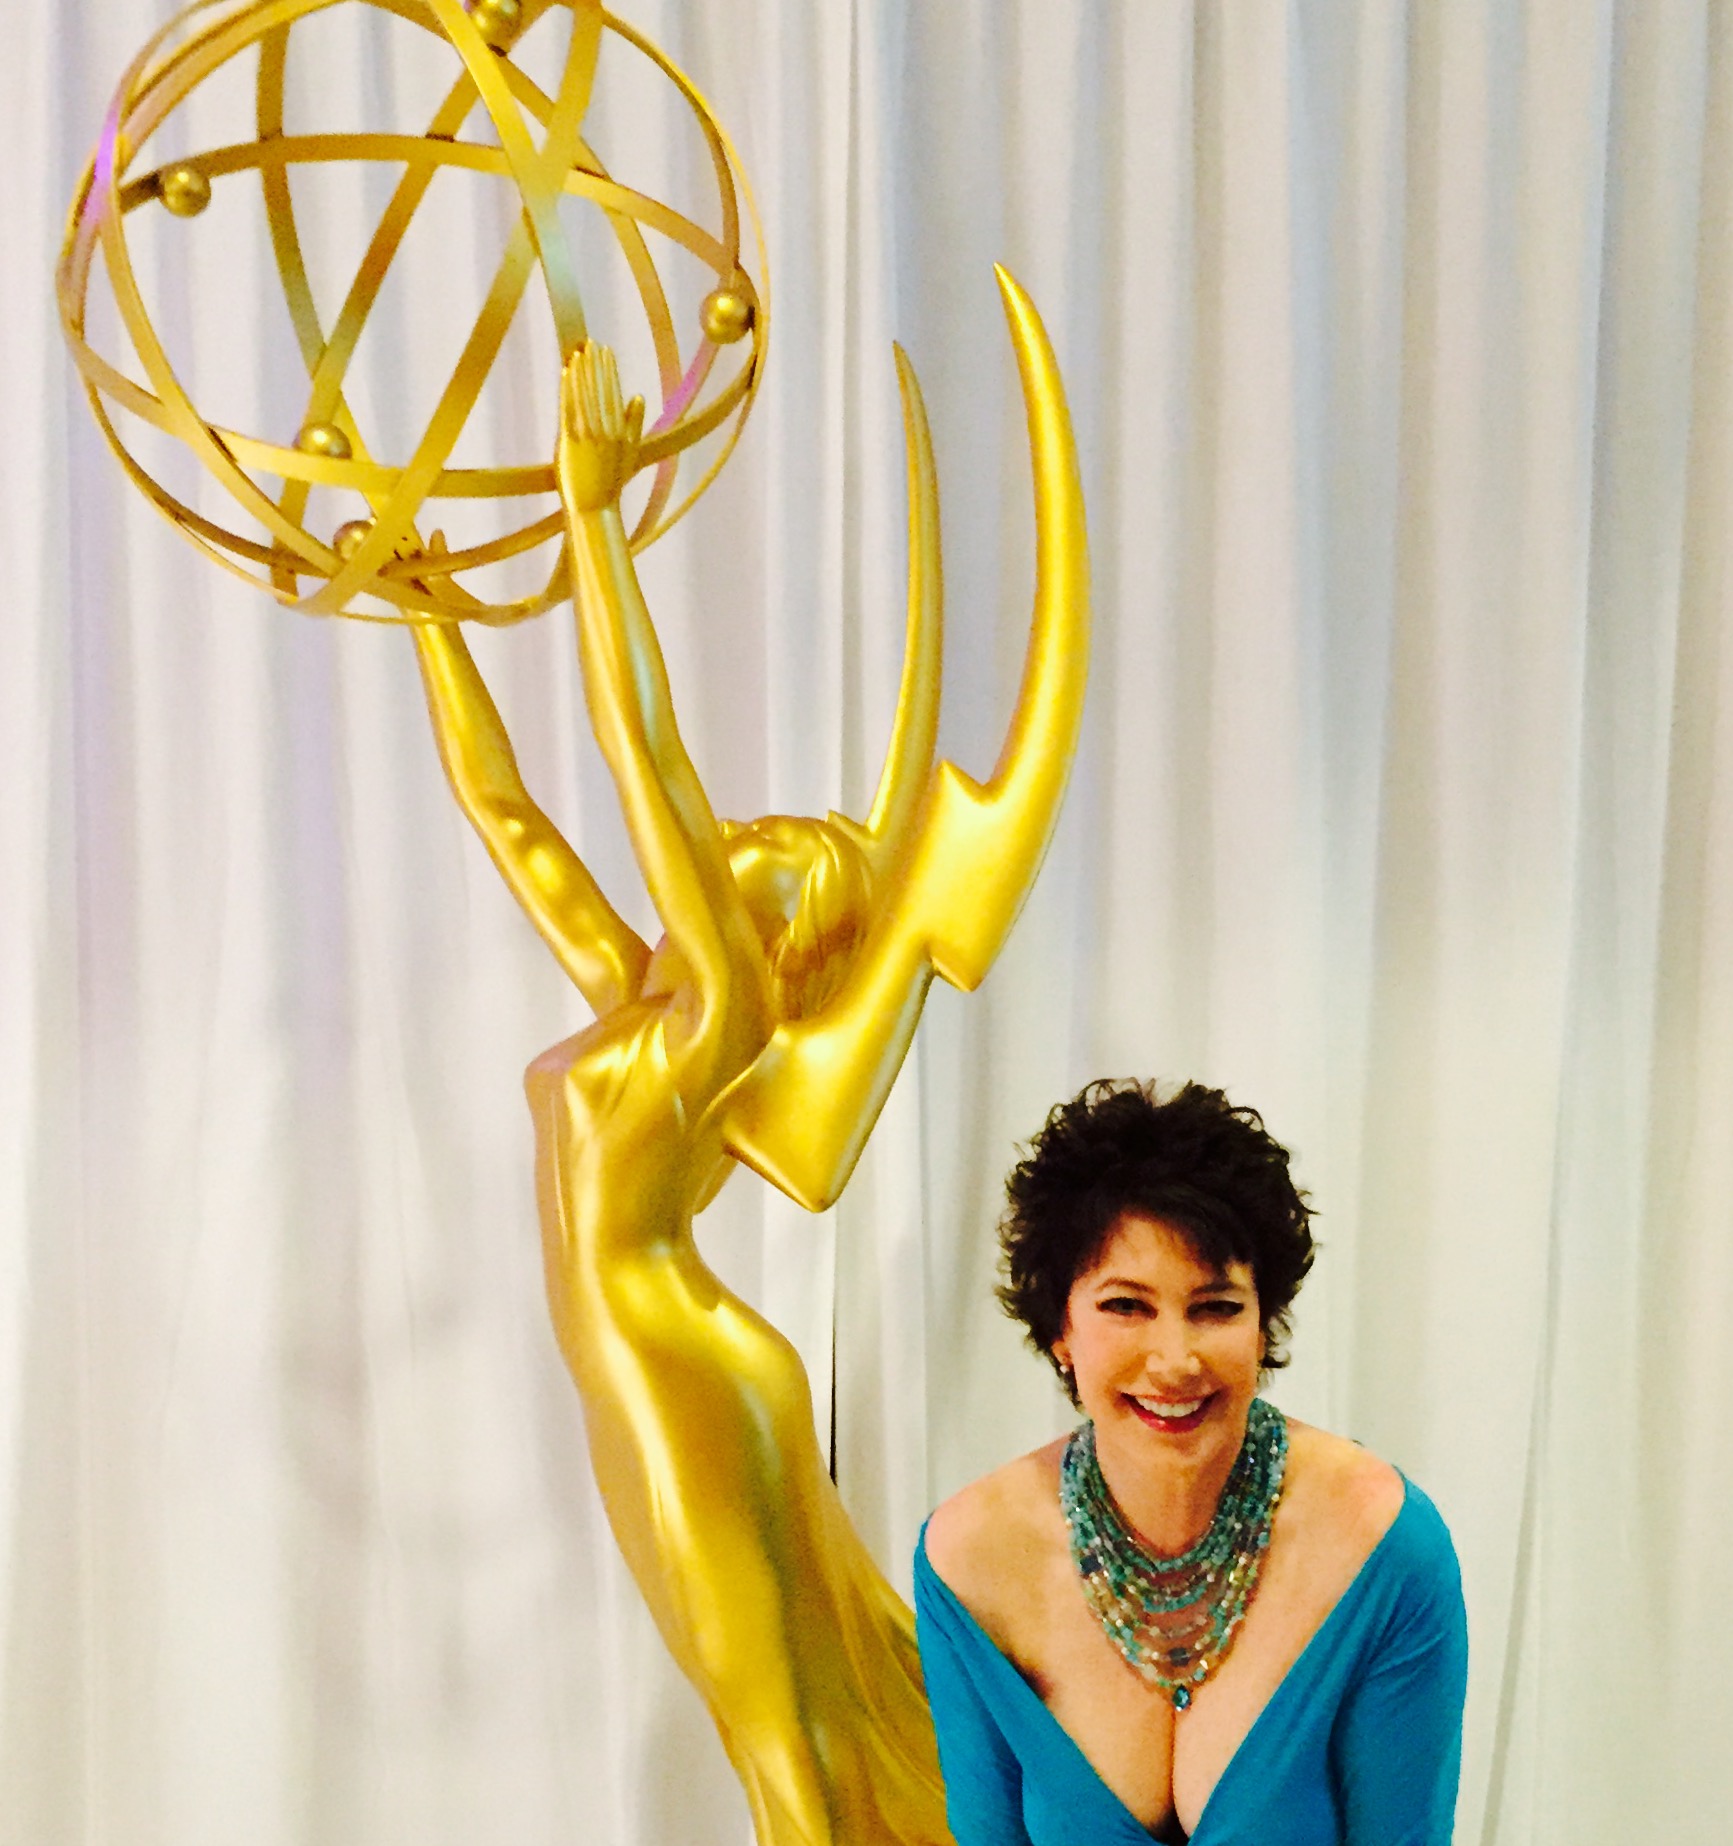 Diane Robin at the 2015 Emmys.